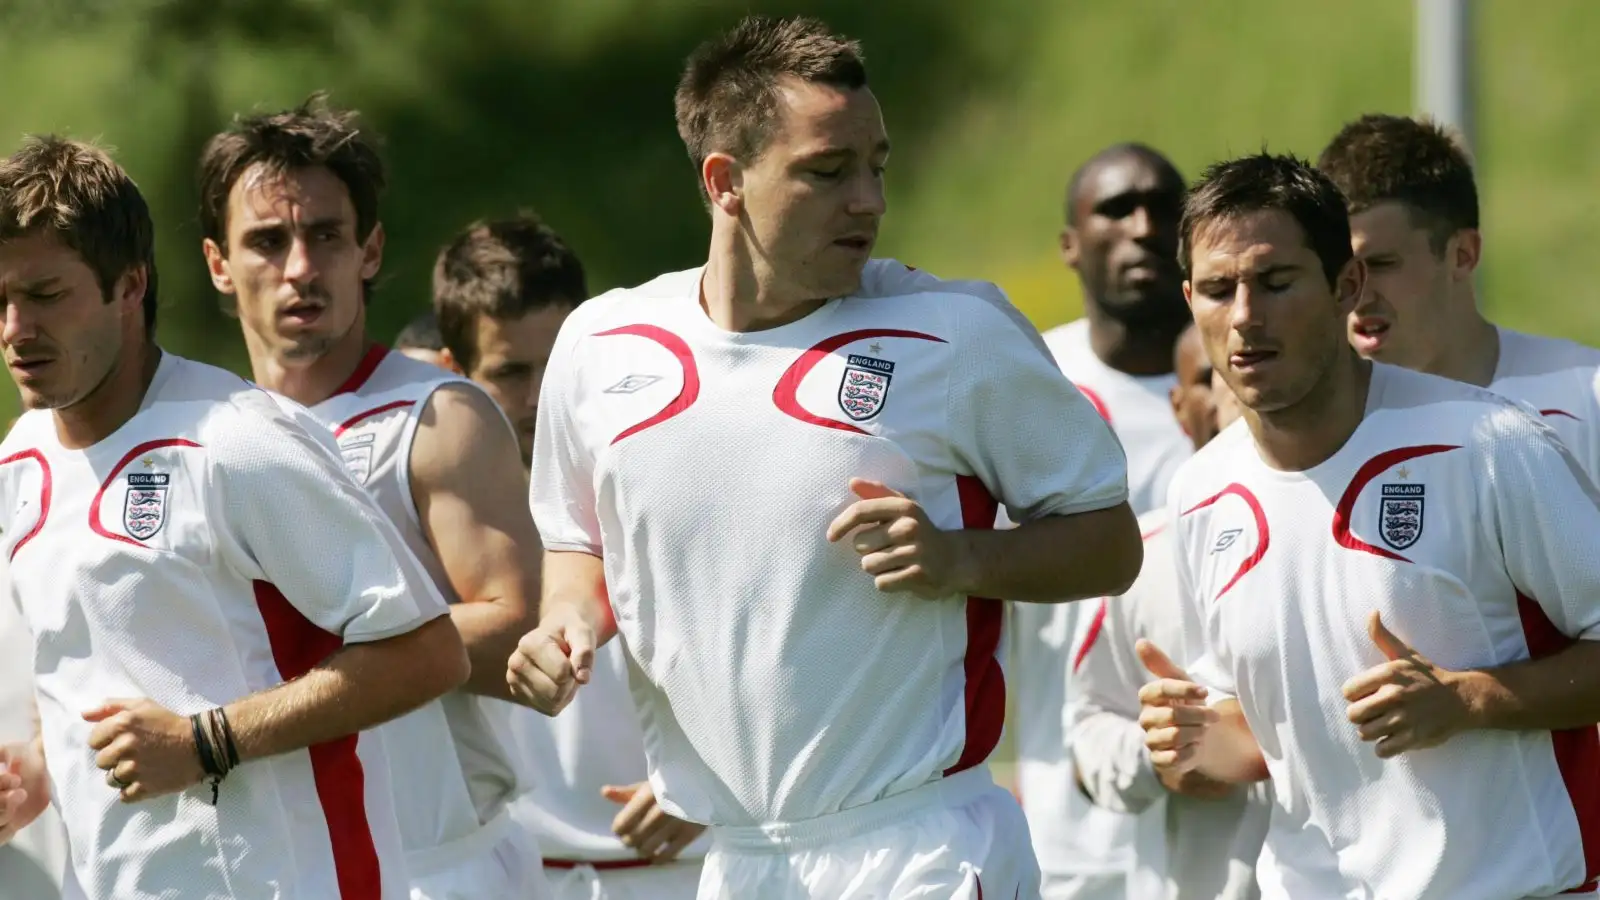 Frank Lampard, John Terry, Gary Neville and David Beckham during an England training session in 2006.